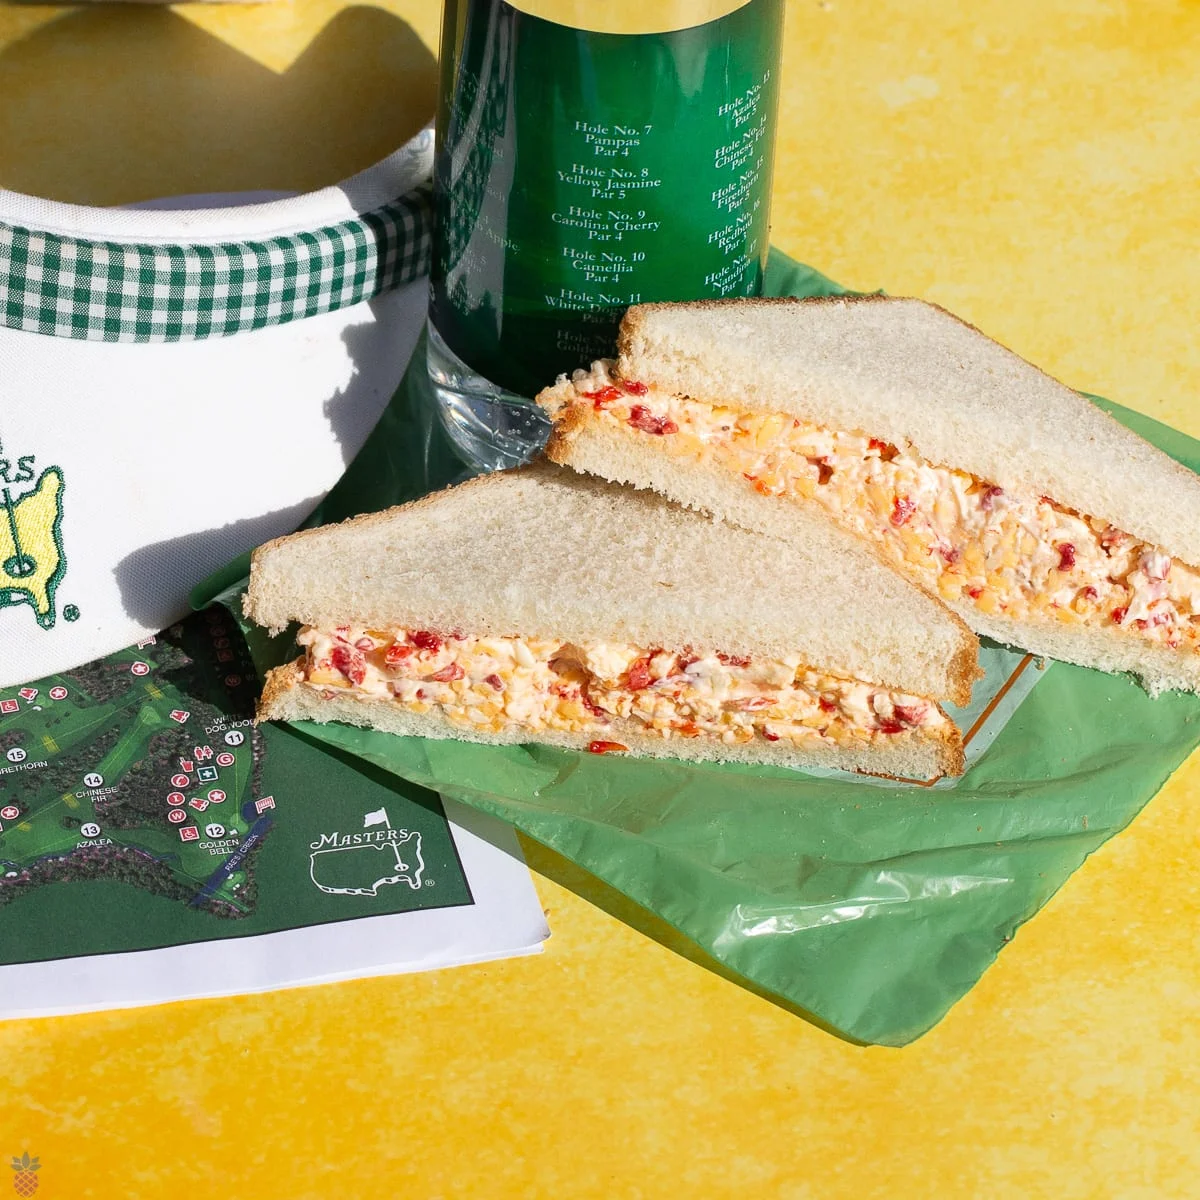 This image shows Pimento Cheese Sandwiches.